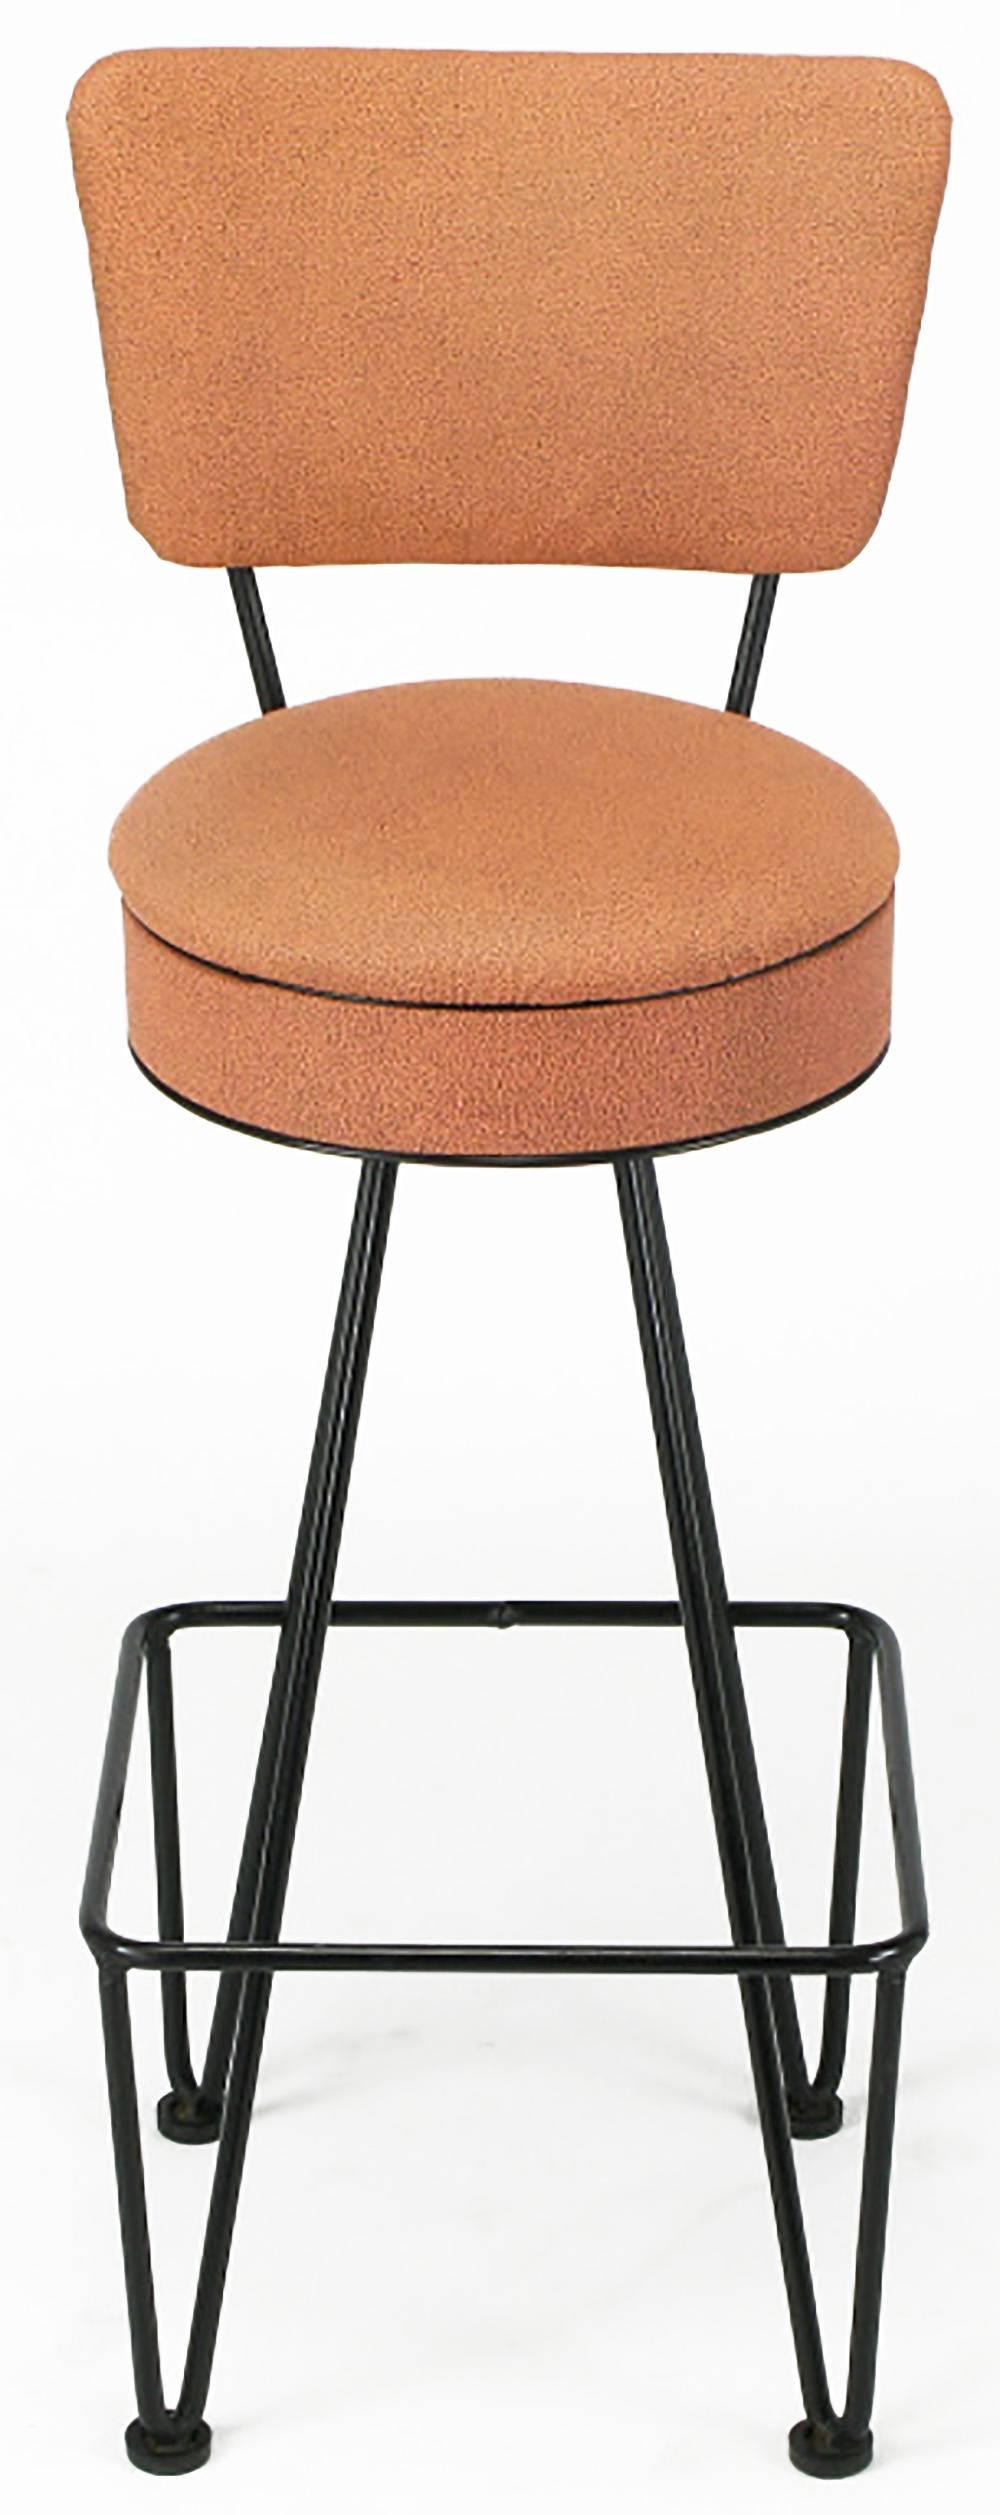 ONLY THREE STOOLS LEFT.
Very much like the 